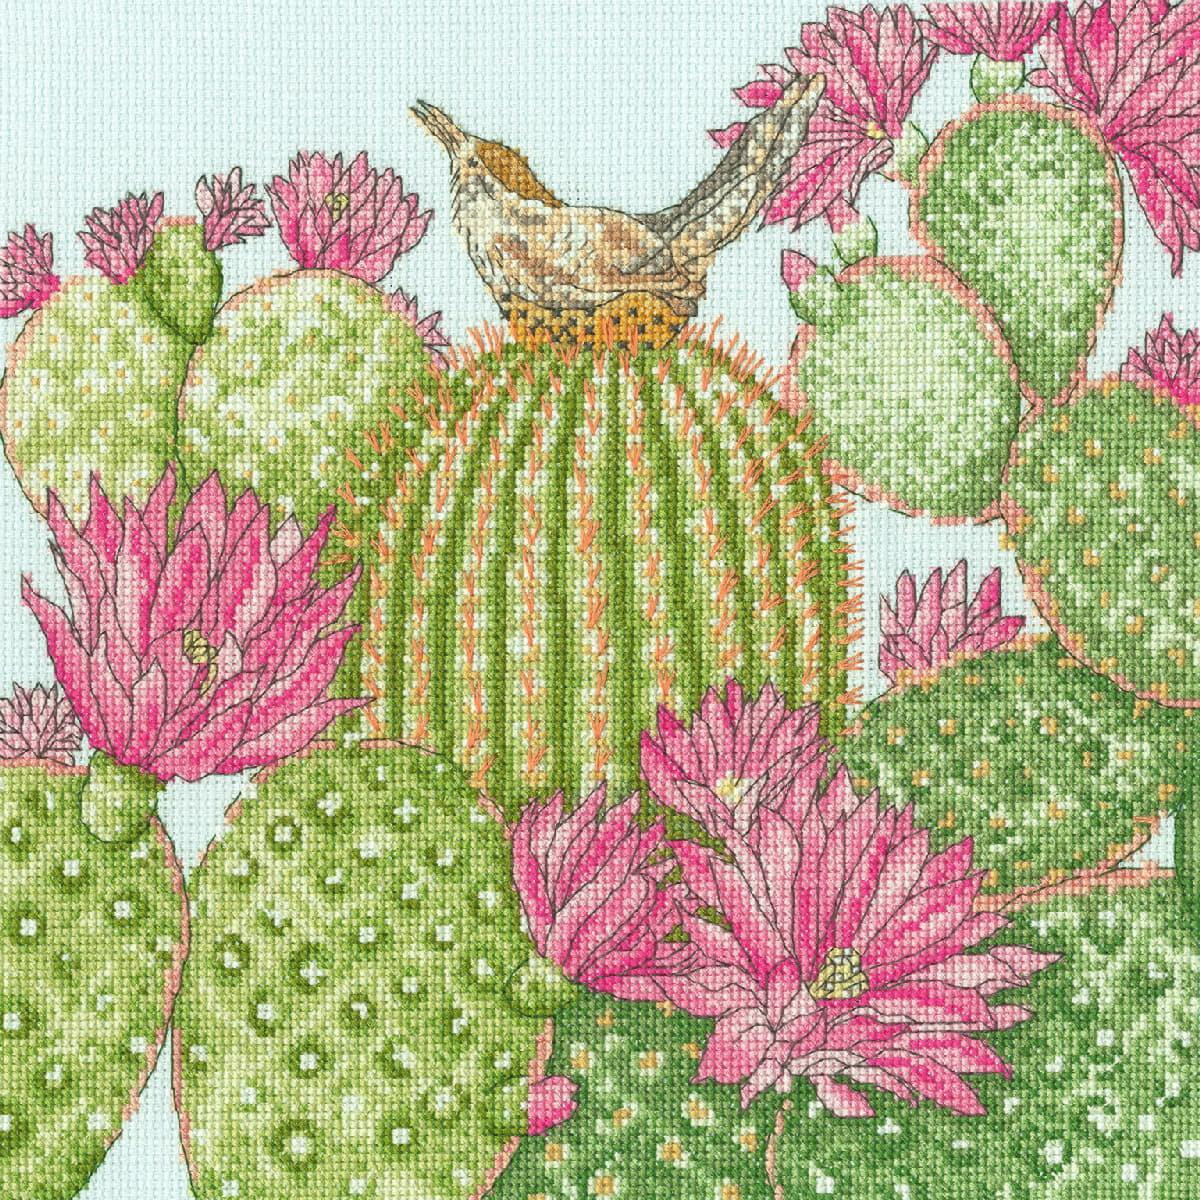 Bothy Threads counted cross stitch kit "Cactus...